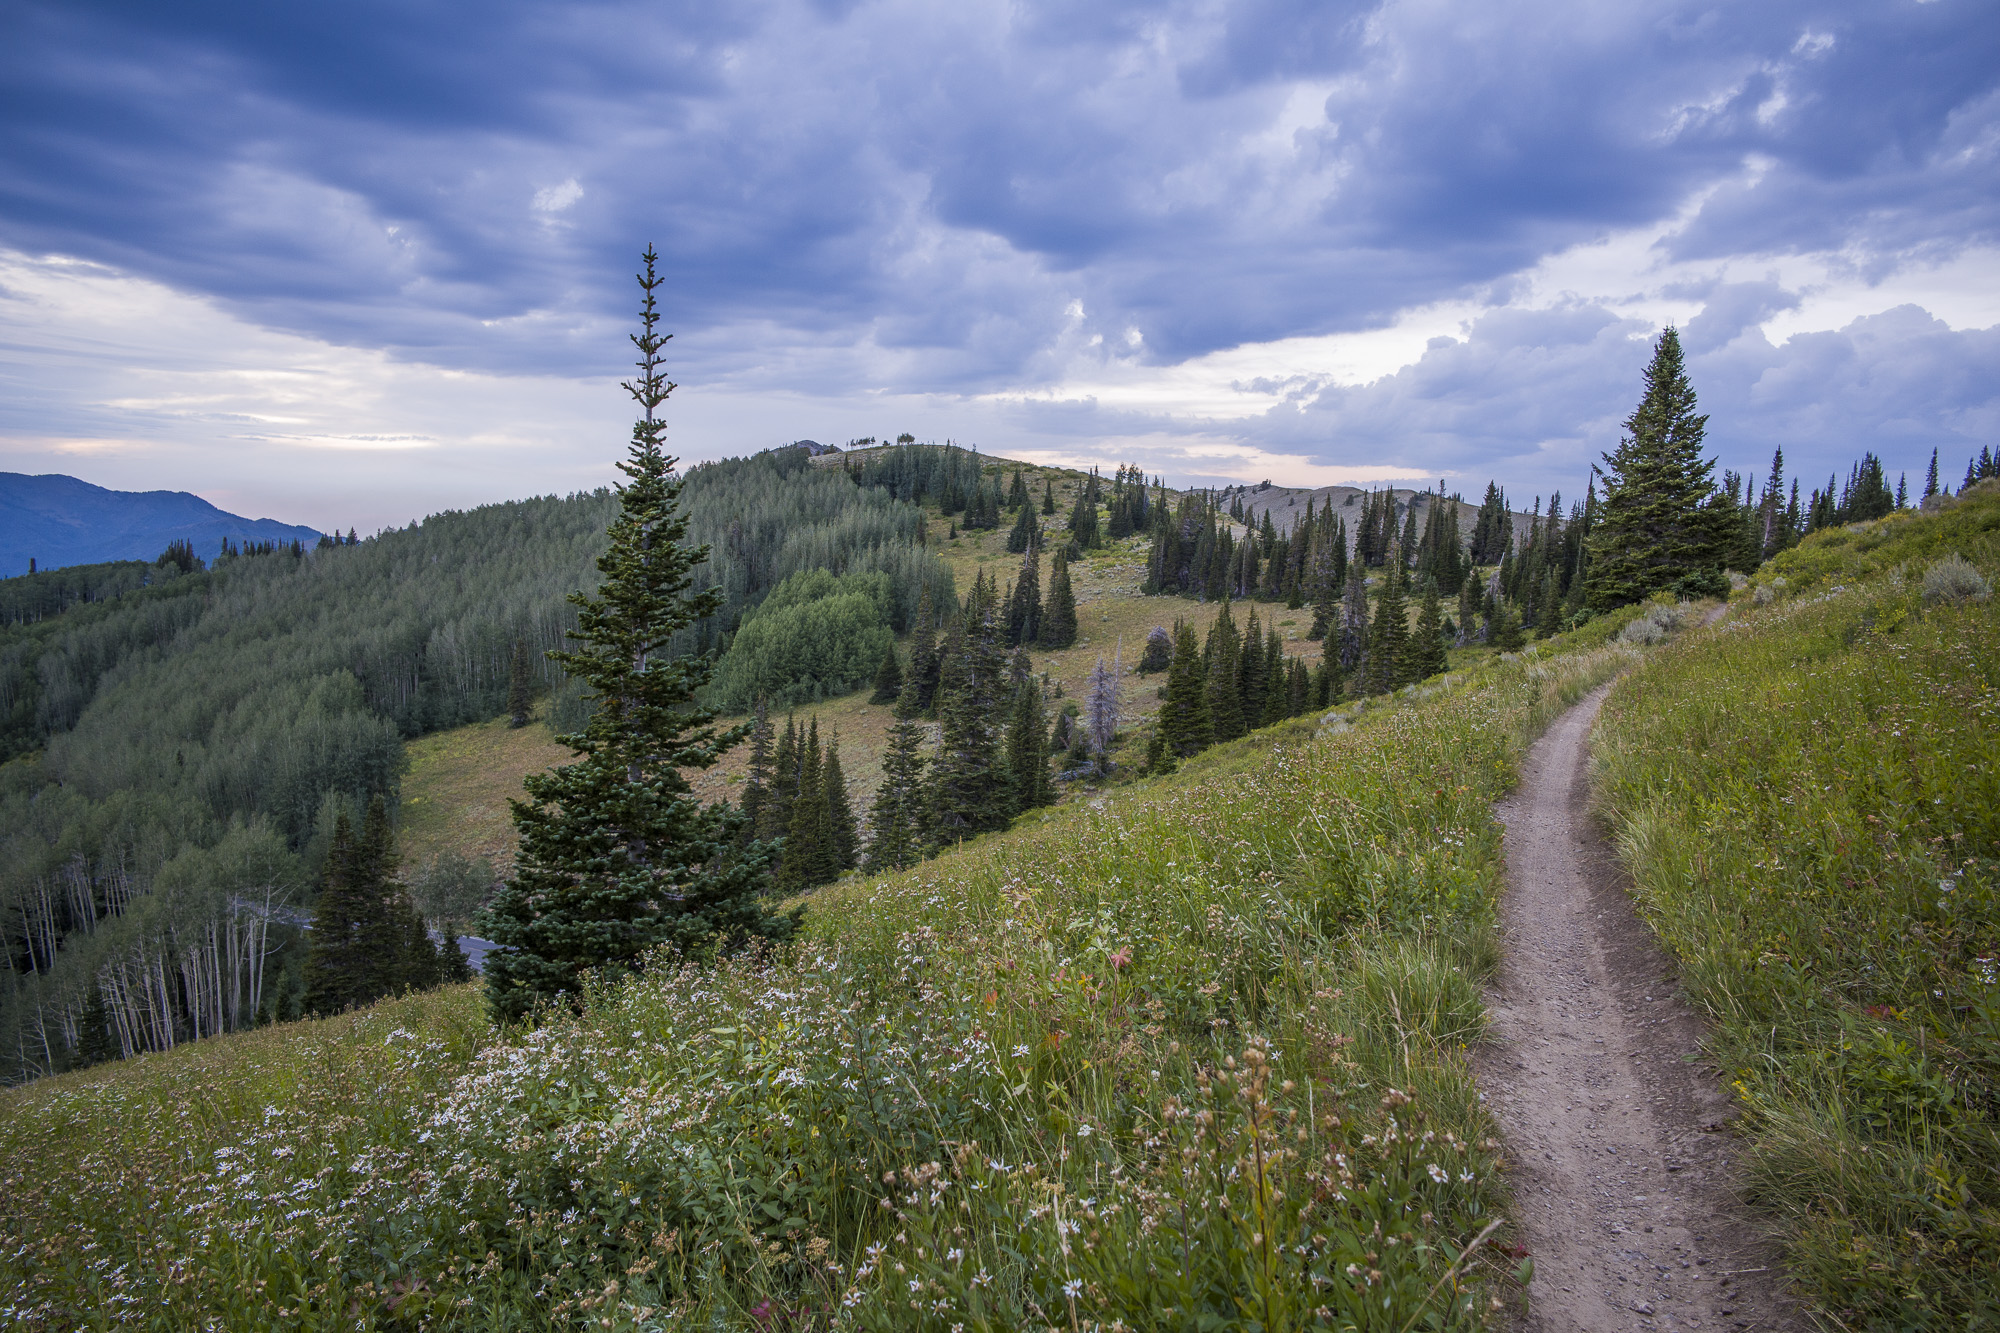 The Crest Trail